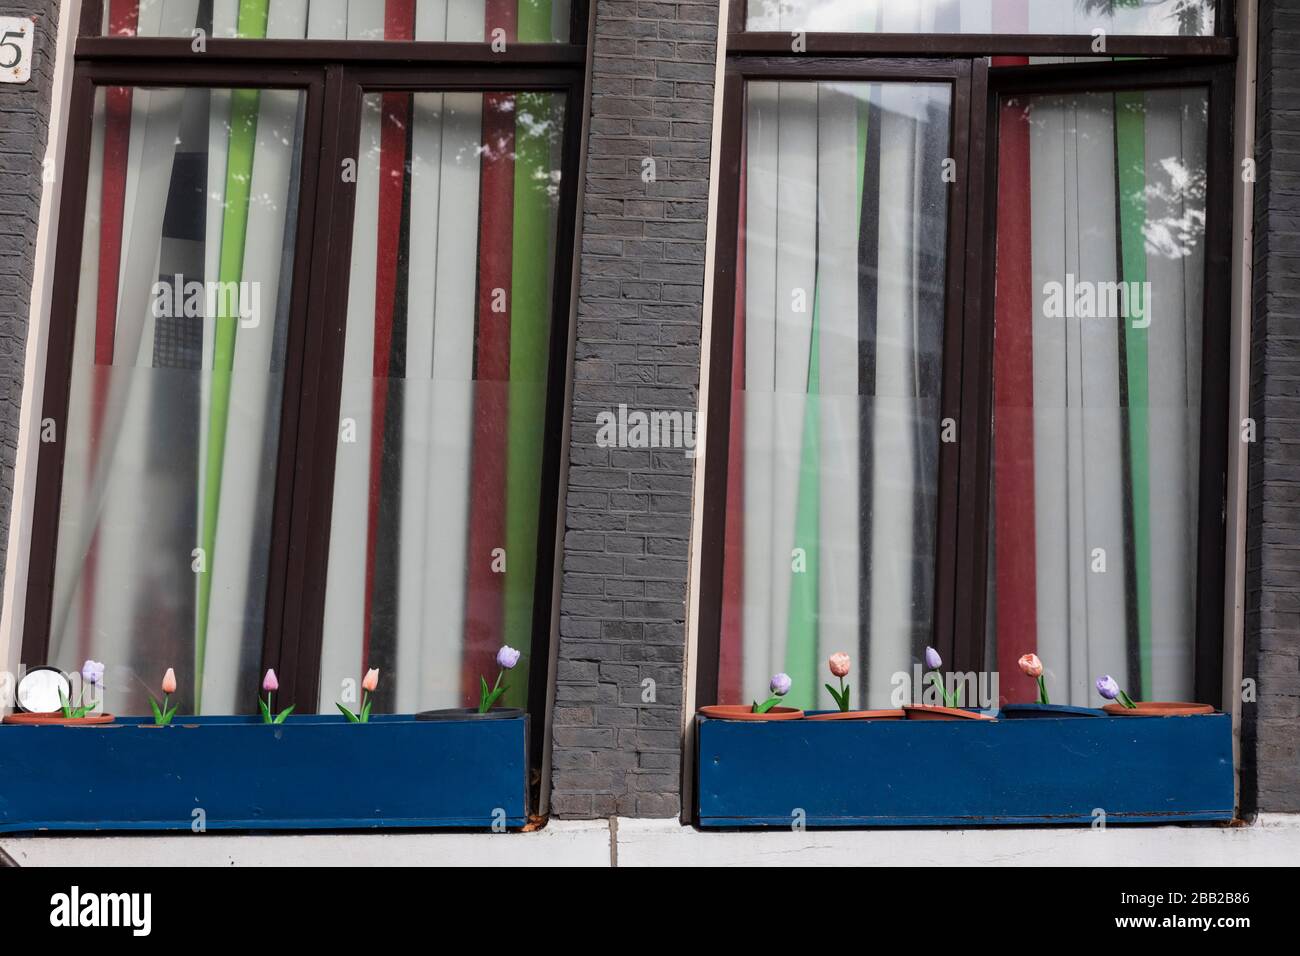 Artificial plastic tulips in pots on a window sill in Amsterdam, Netherlands. Stock Photo